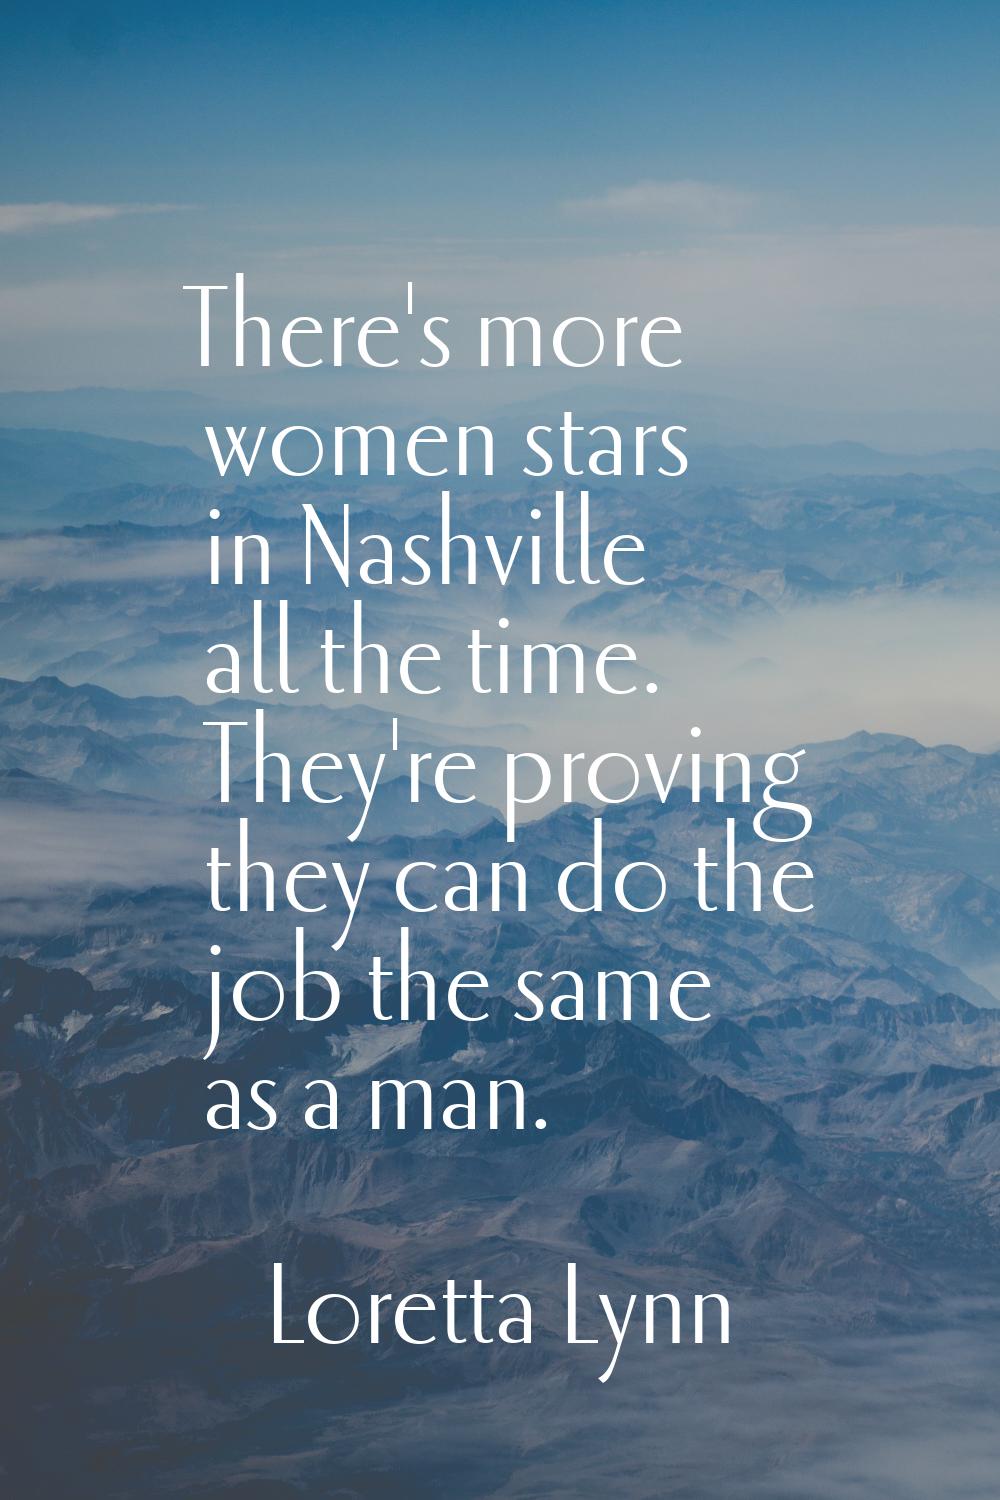 There's more women stars in Nashville all the time. They're proving they can do the job the same as